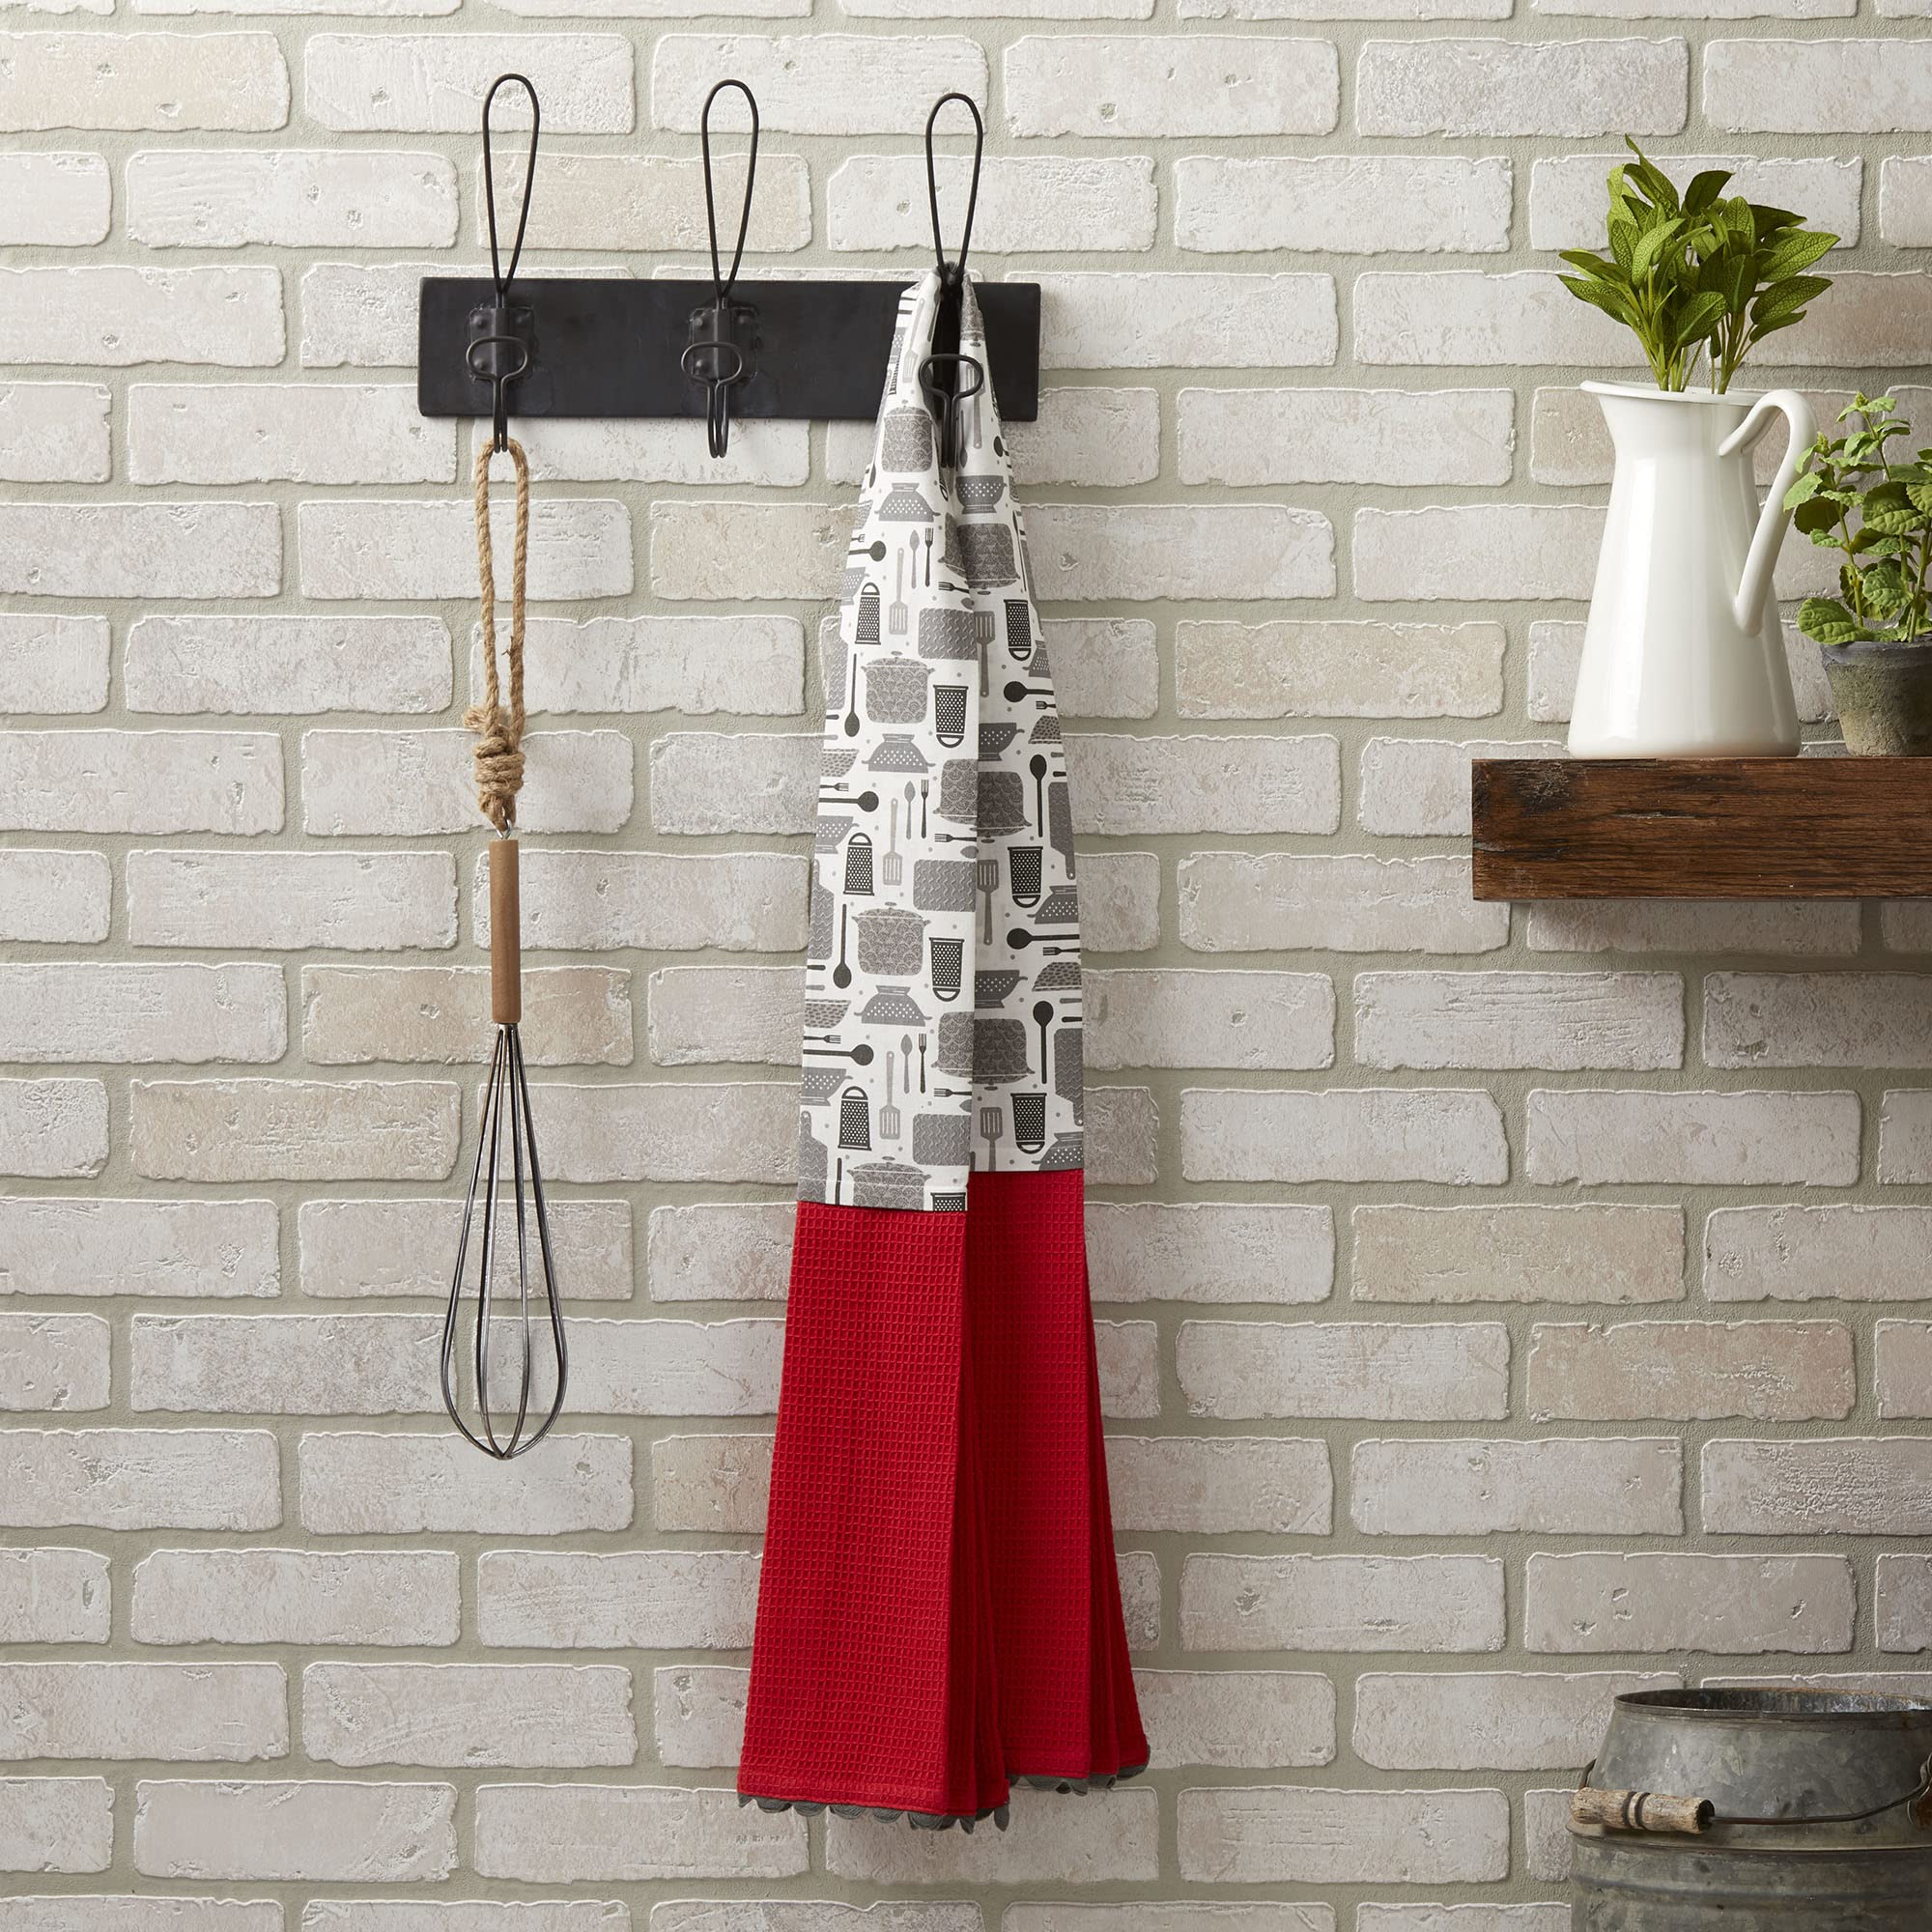 DEMDACO Kitchen Patterned Deep Red and Grey 68 inch 100% Cotton Dish Towel Boa